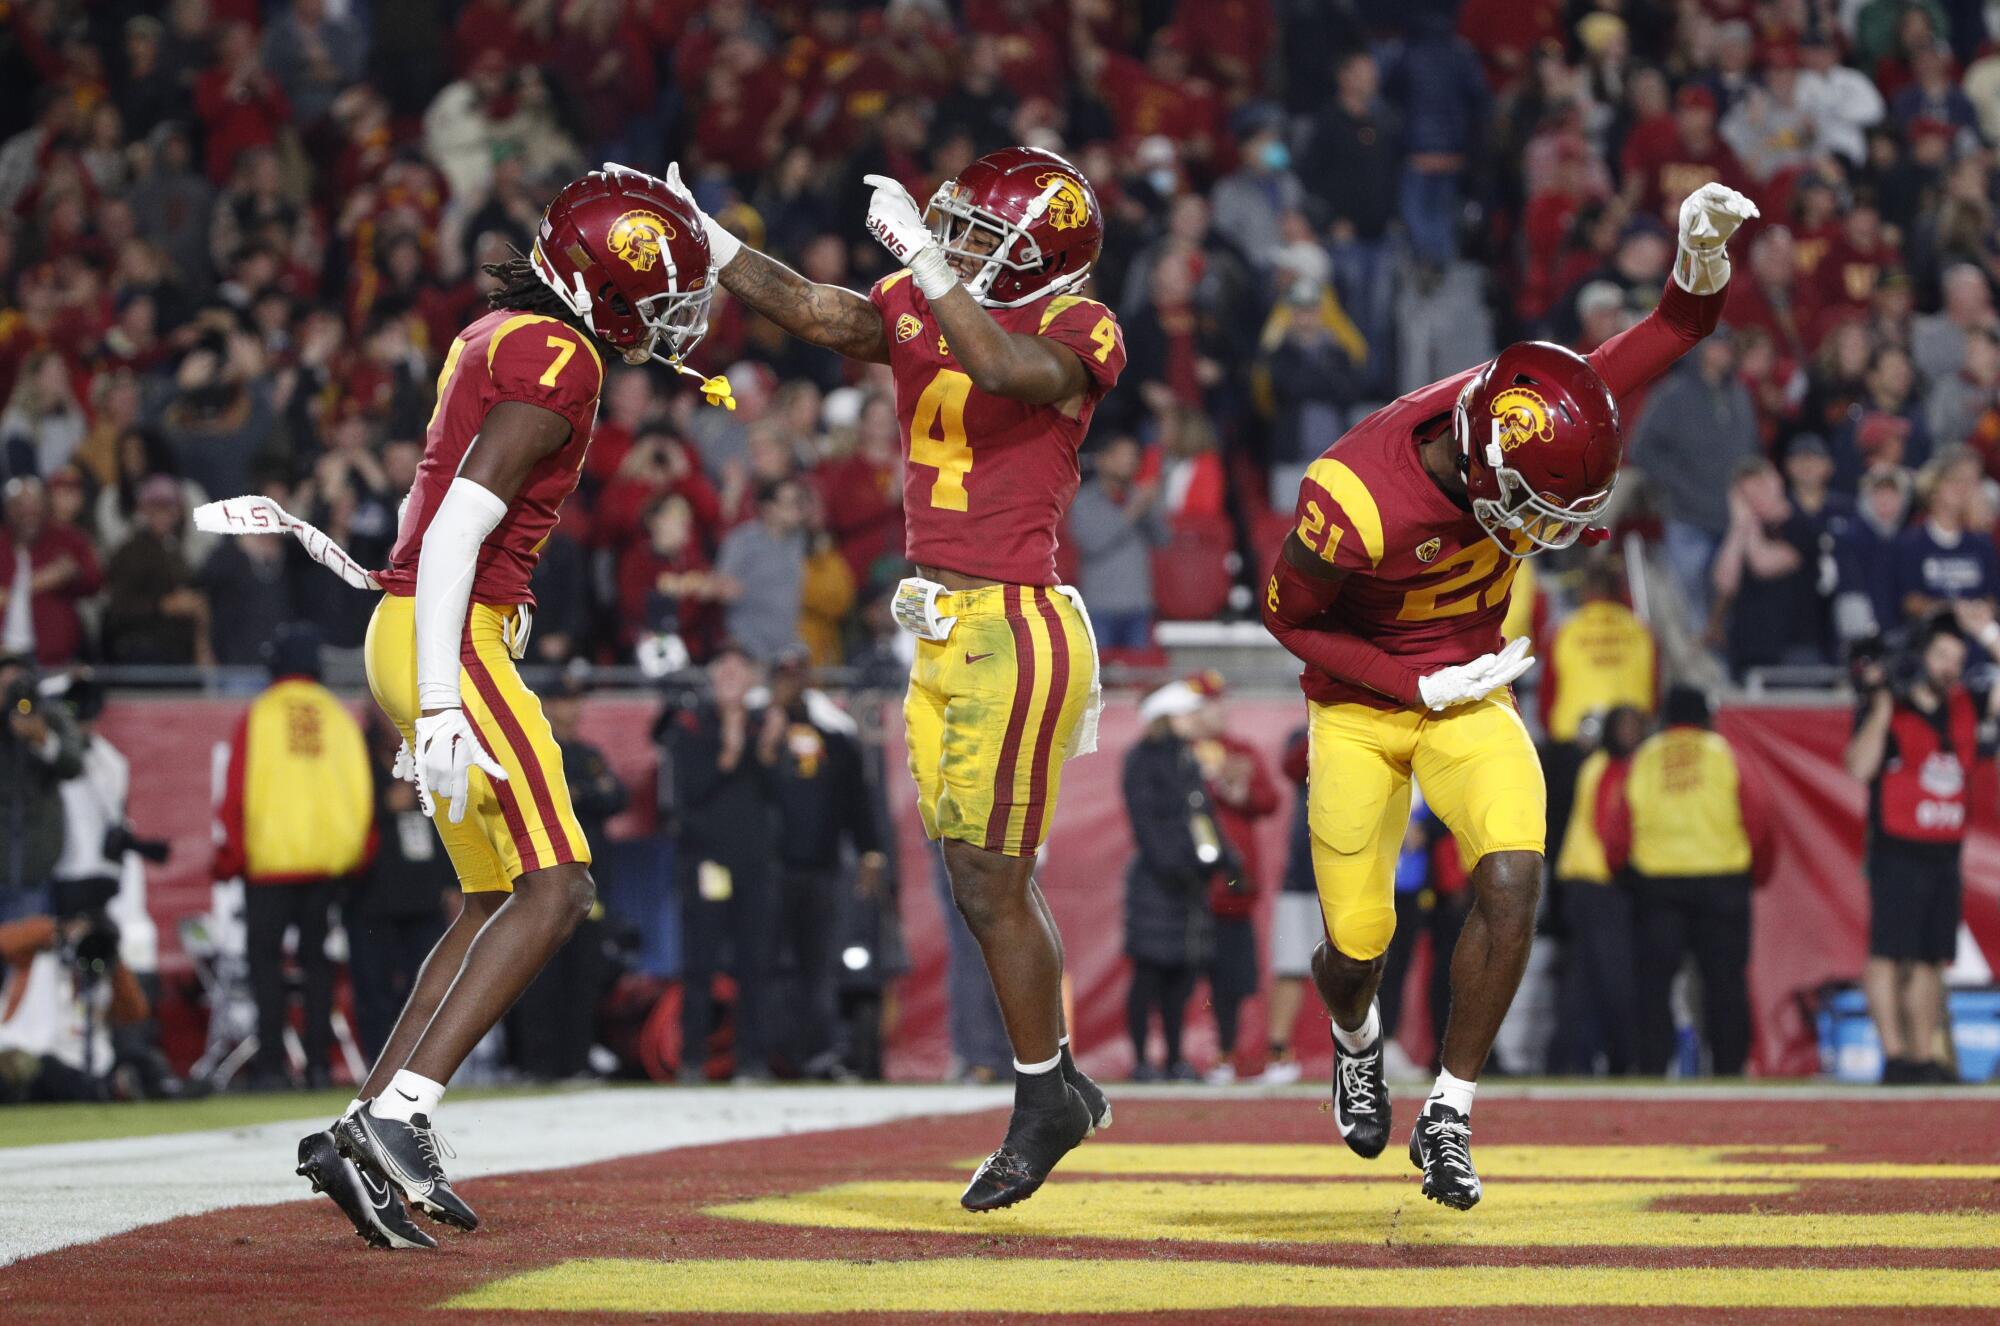 USC defensive back Calen Bullock celebrates with Max Williams and Latrell McCutchin after intercepting a pass.